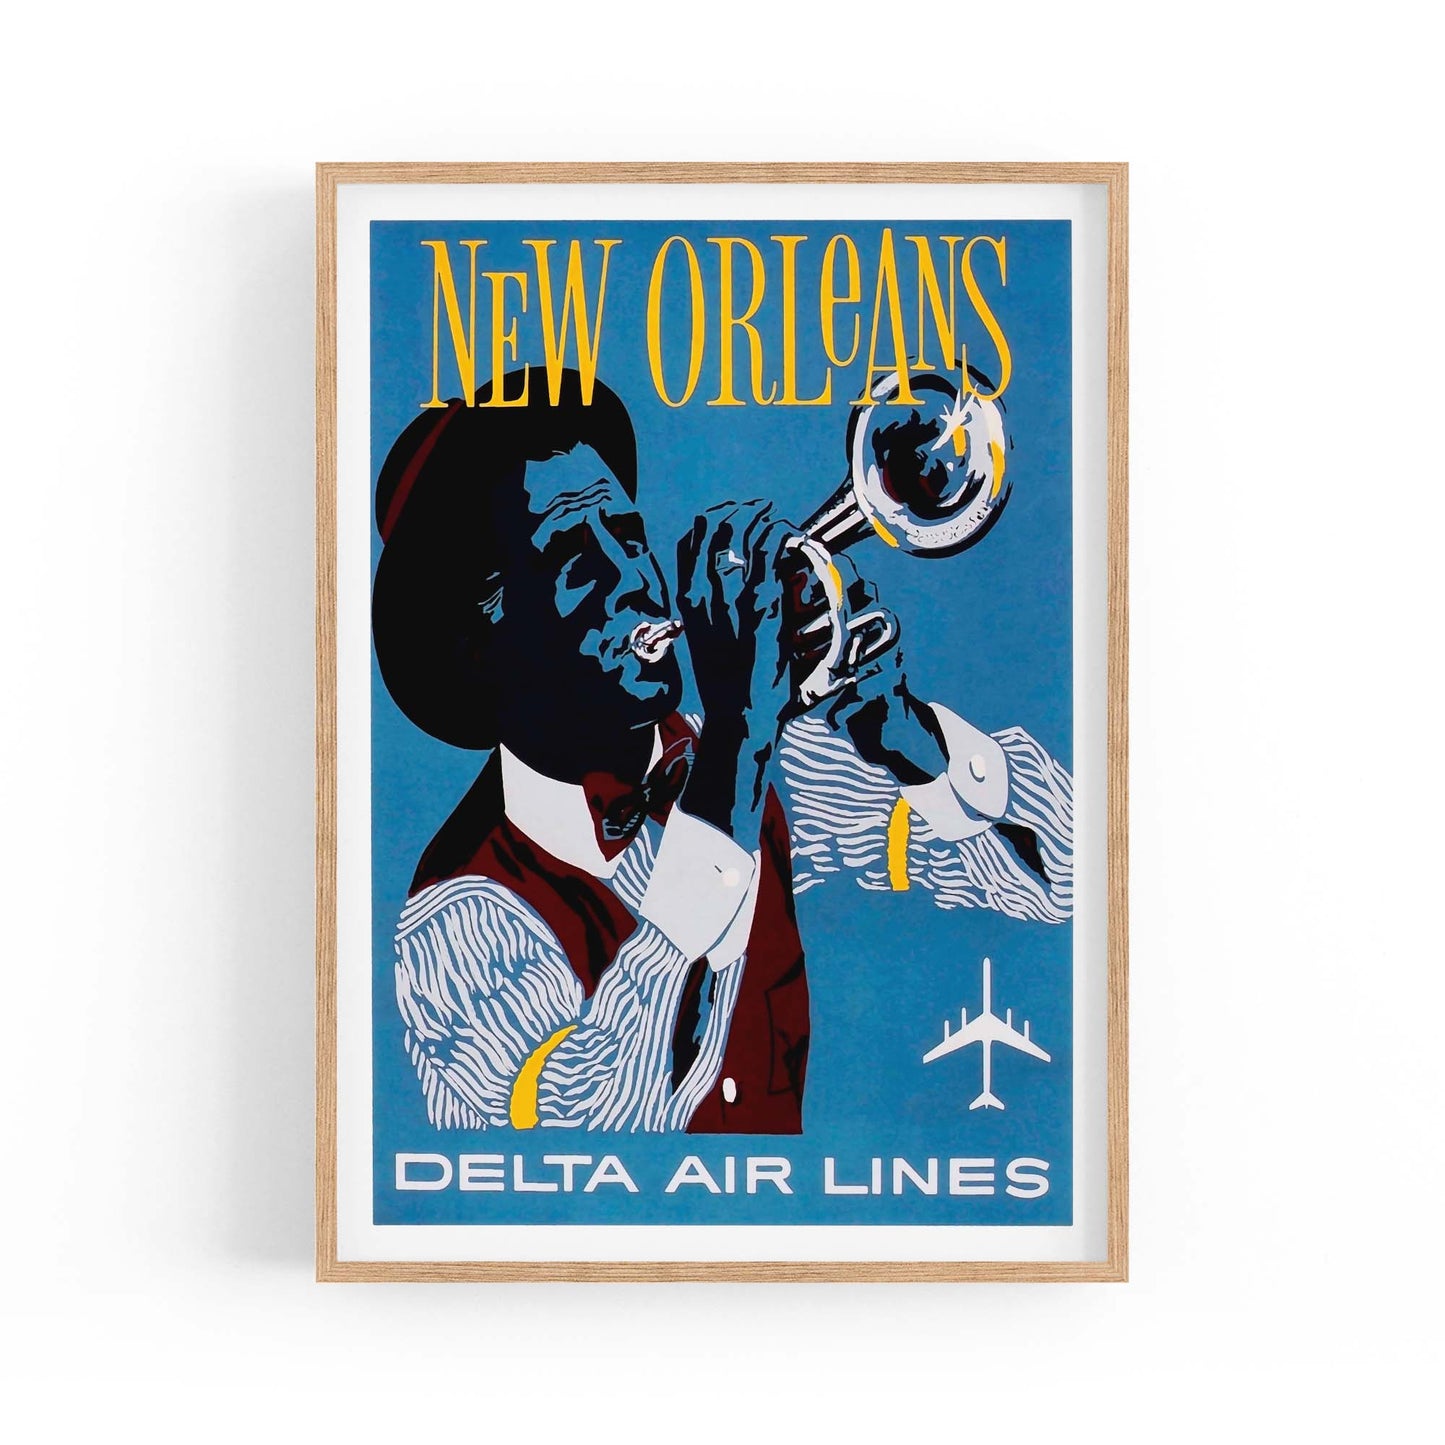 New Orleans USA Jazz Vintage Travel Advert Art - The Affordable Art Company